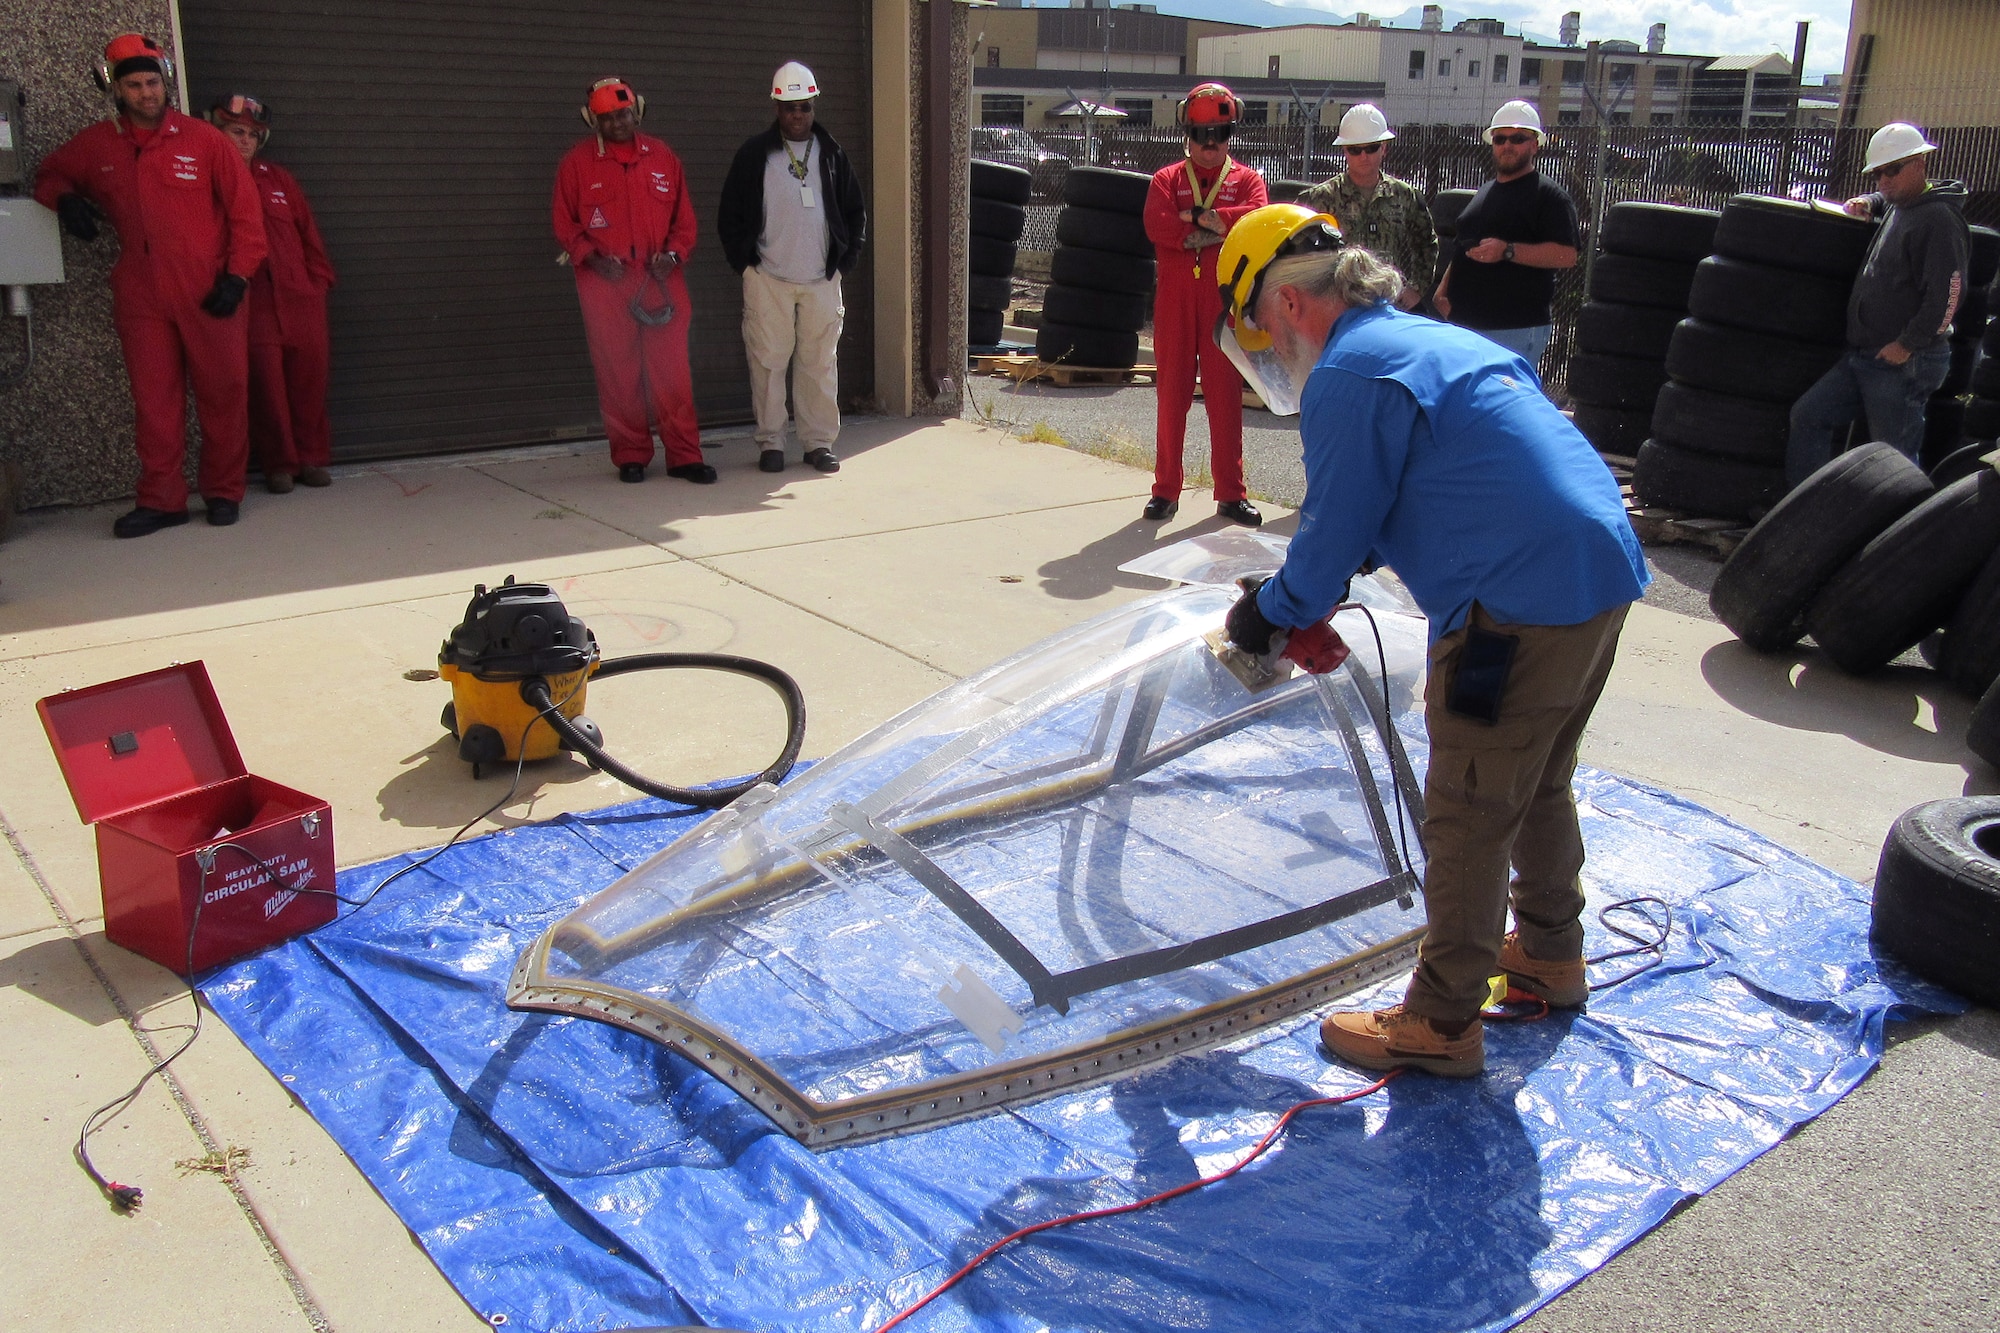 A student uses a cutting device on an aircraft canopy sitting on the ground while others observe.